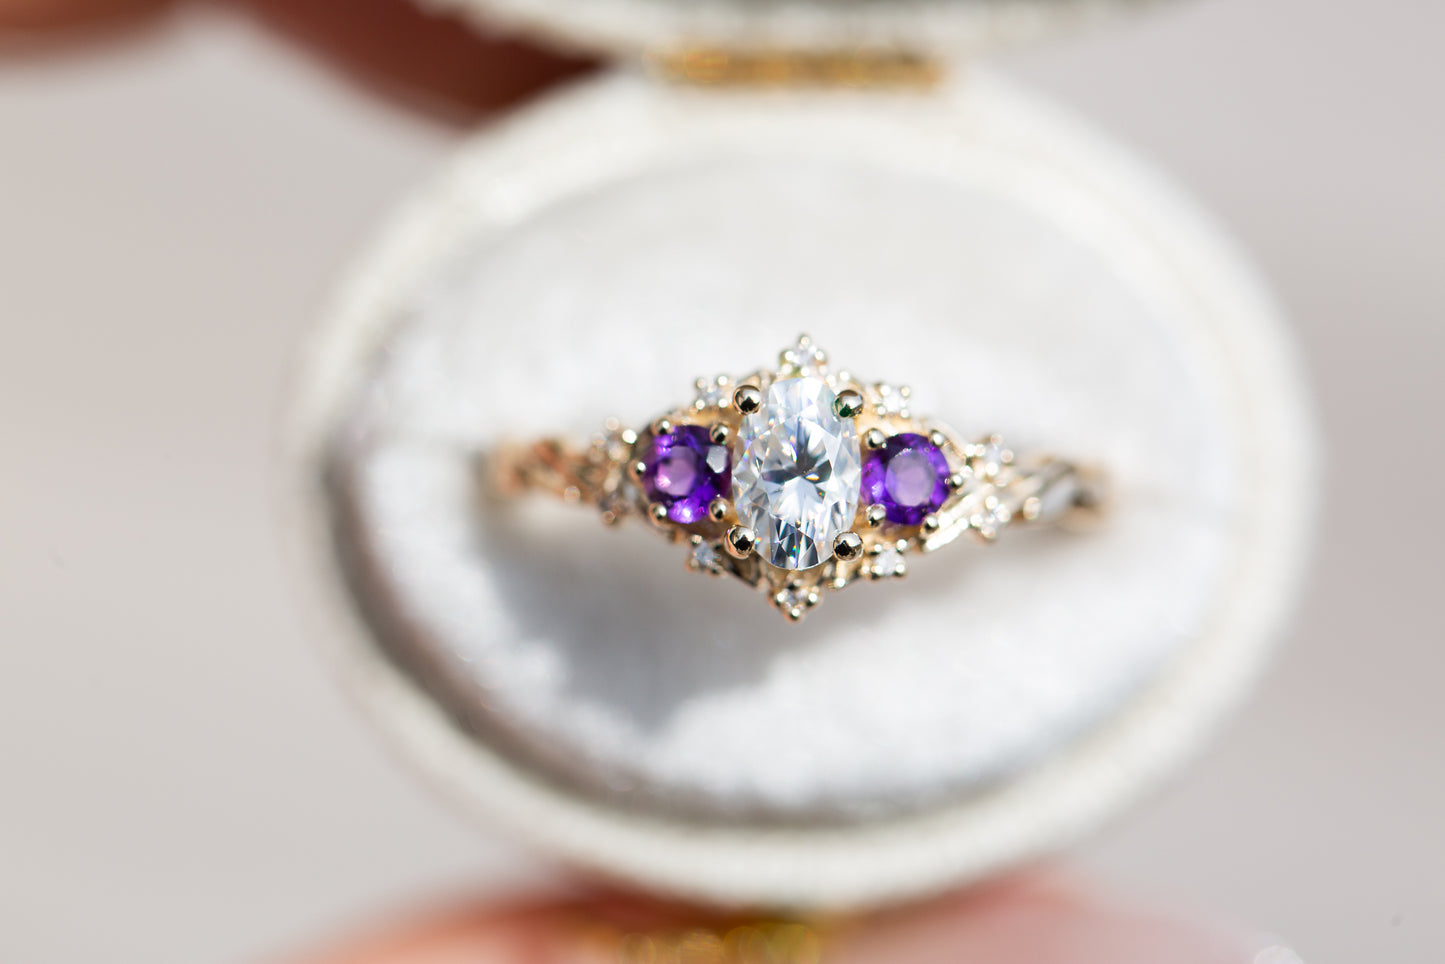 Briar rose three stone with oval moissanite and round amethyst side stones (fairy queen)